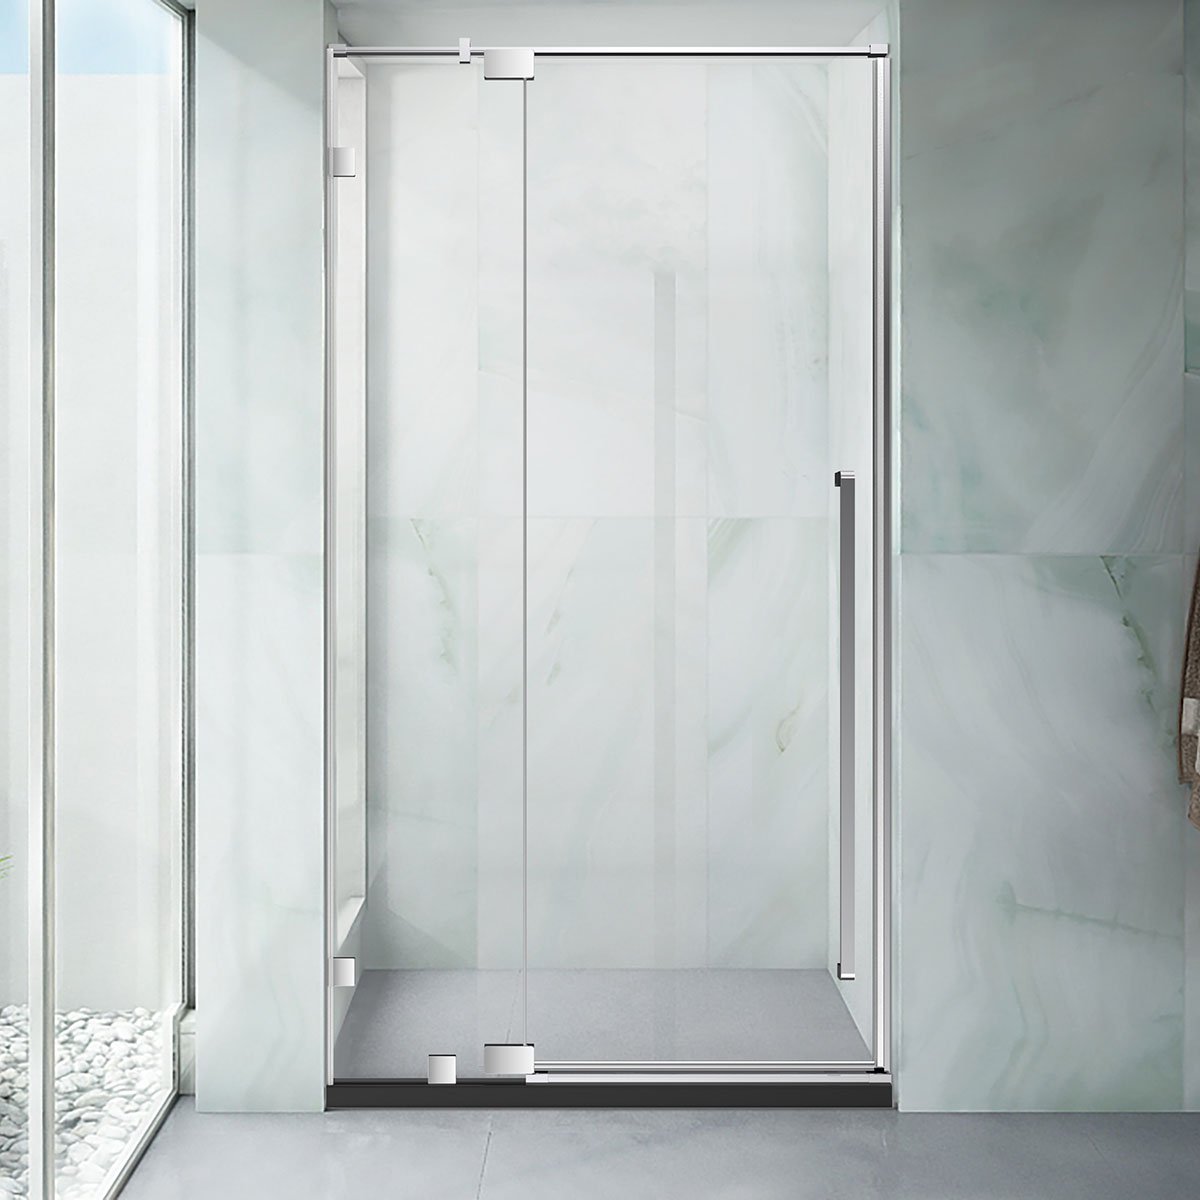 48" AH01 Series Frameless Swing Shower Door with Klearteck Treatment (Fixed 3/8" & Swing 5/16" Thickness) (Brushed Nickel)